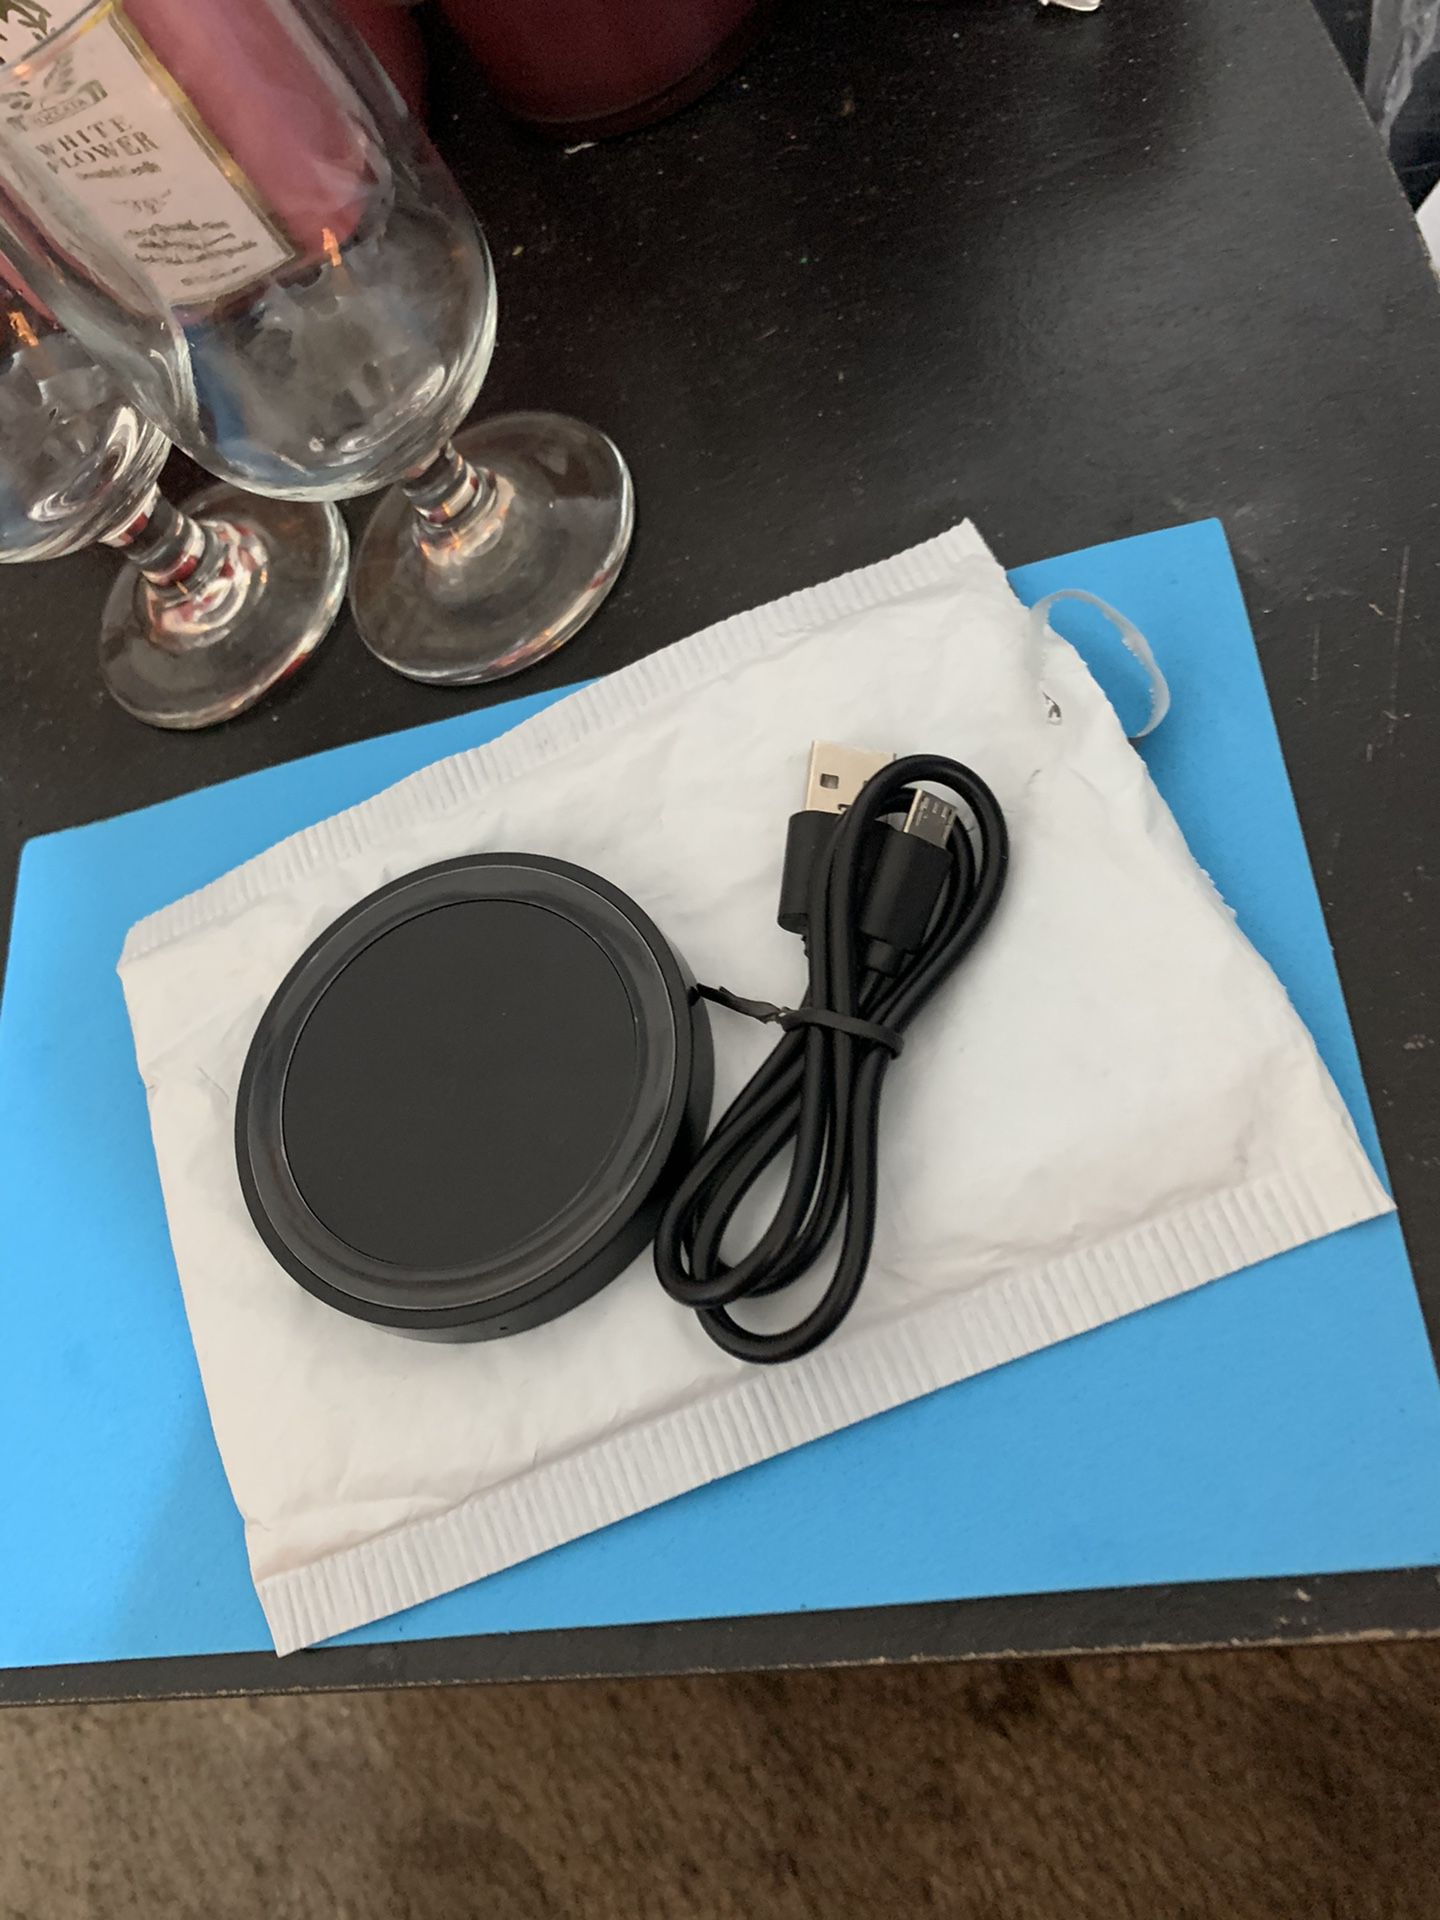 Wireless charger for free